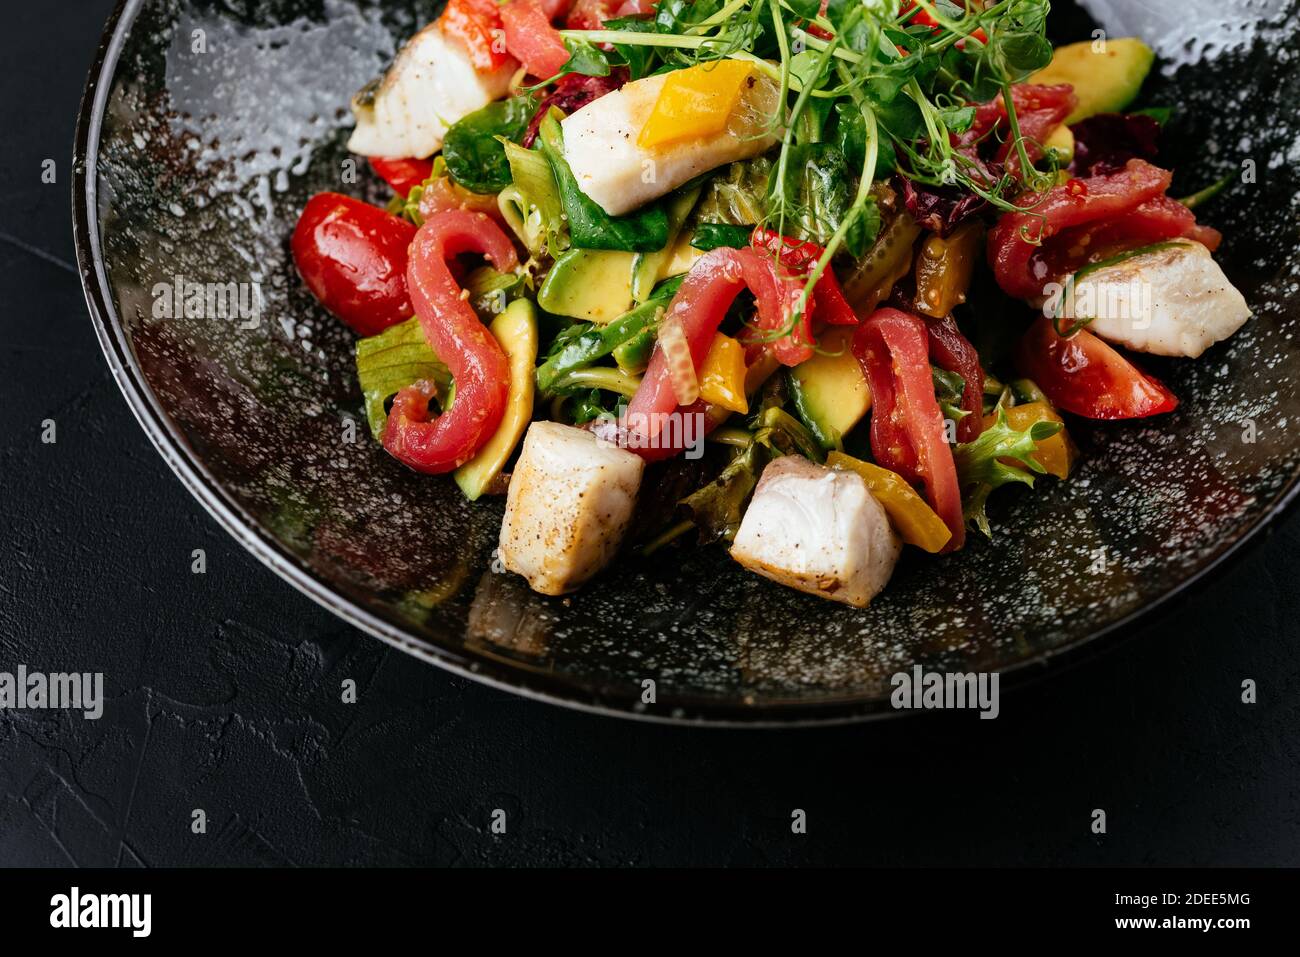 salad with shrimp, vegetables and crab meat on a black background Stock Photo